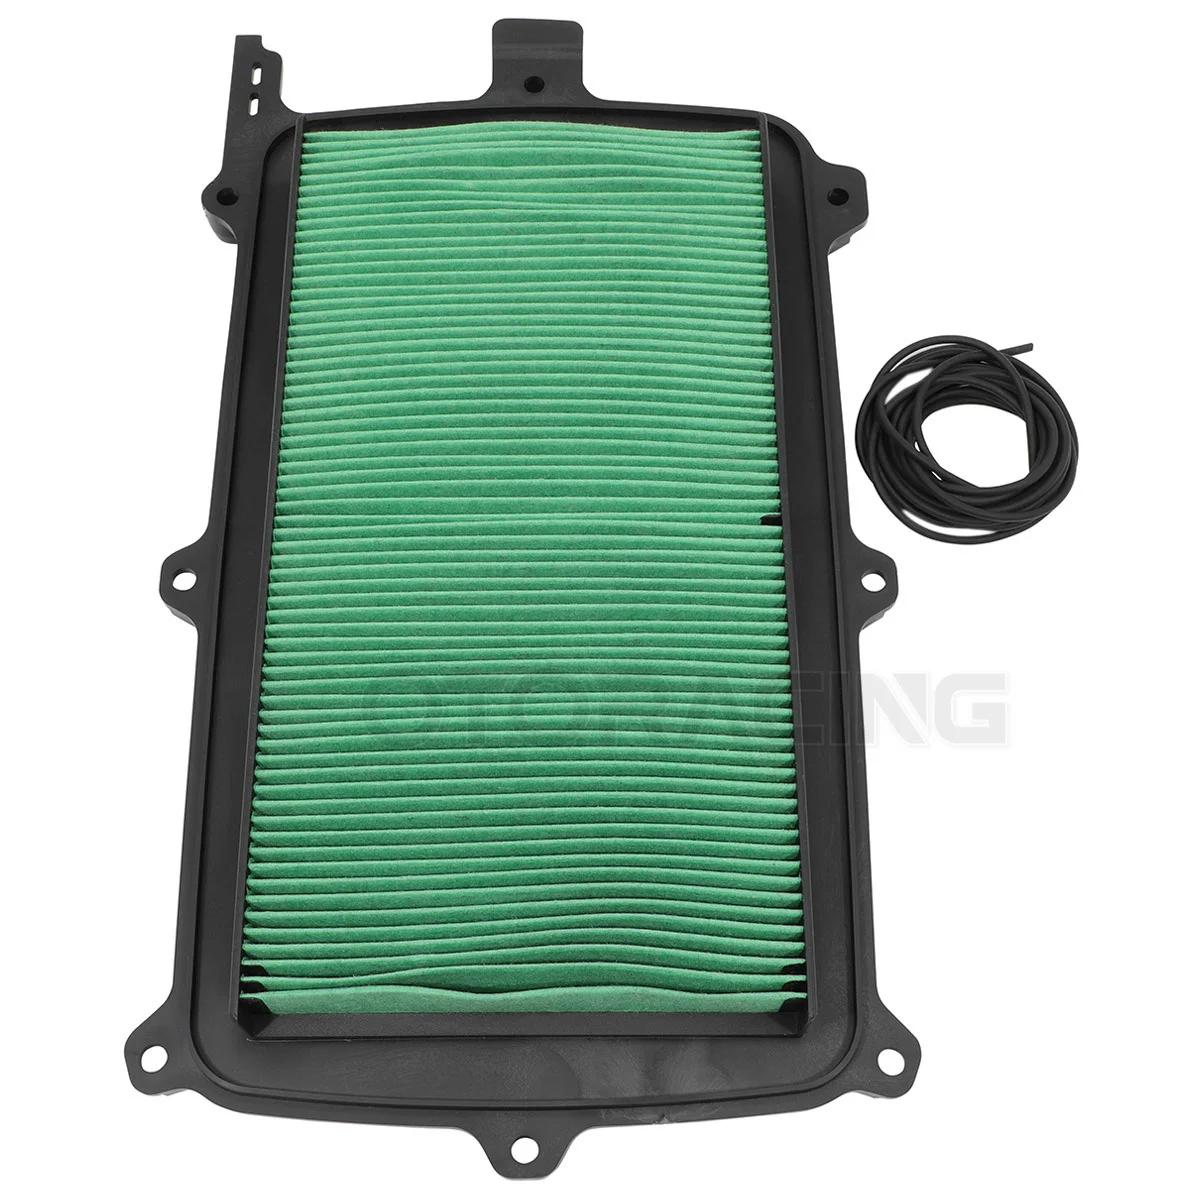 

Motorcycle Air Filter Air Cleaner For Honda TALON 1000 R X 2019 2020 2021 OEM NO:17215-HL6-A00